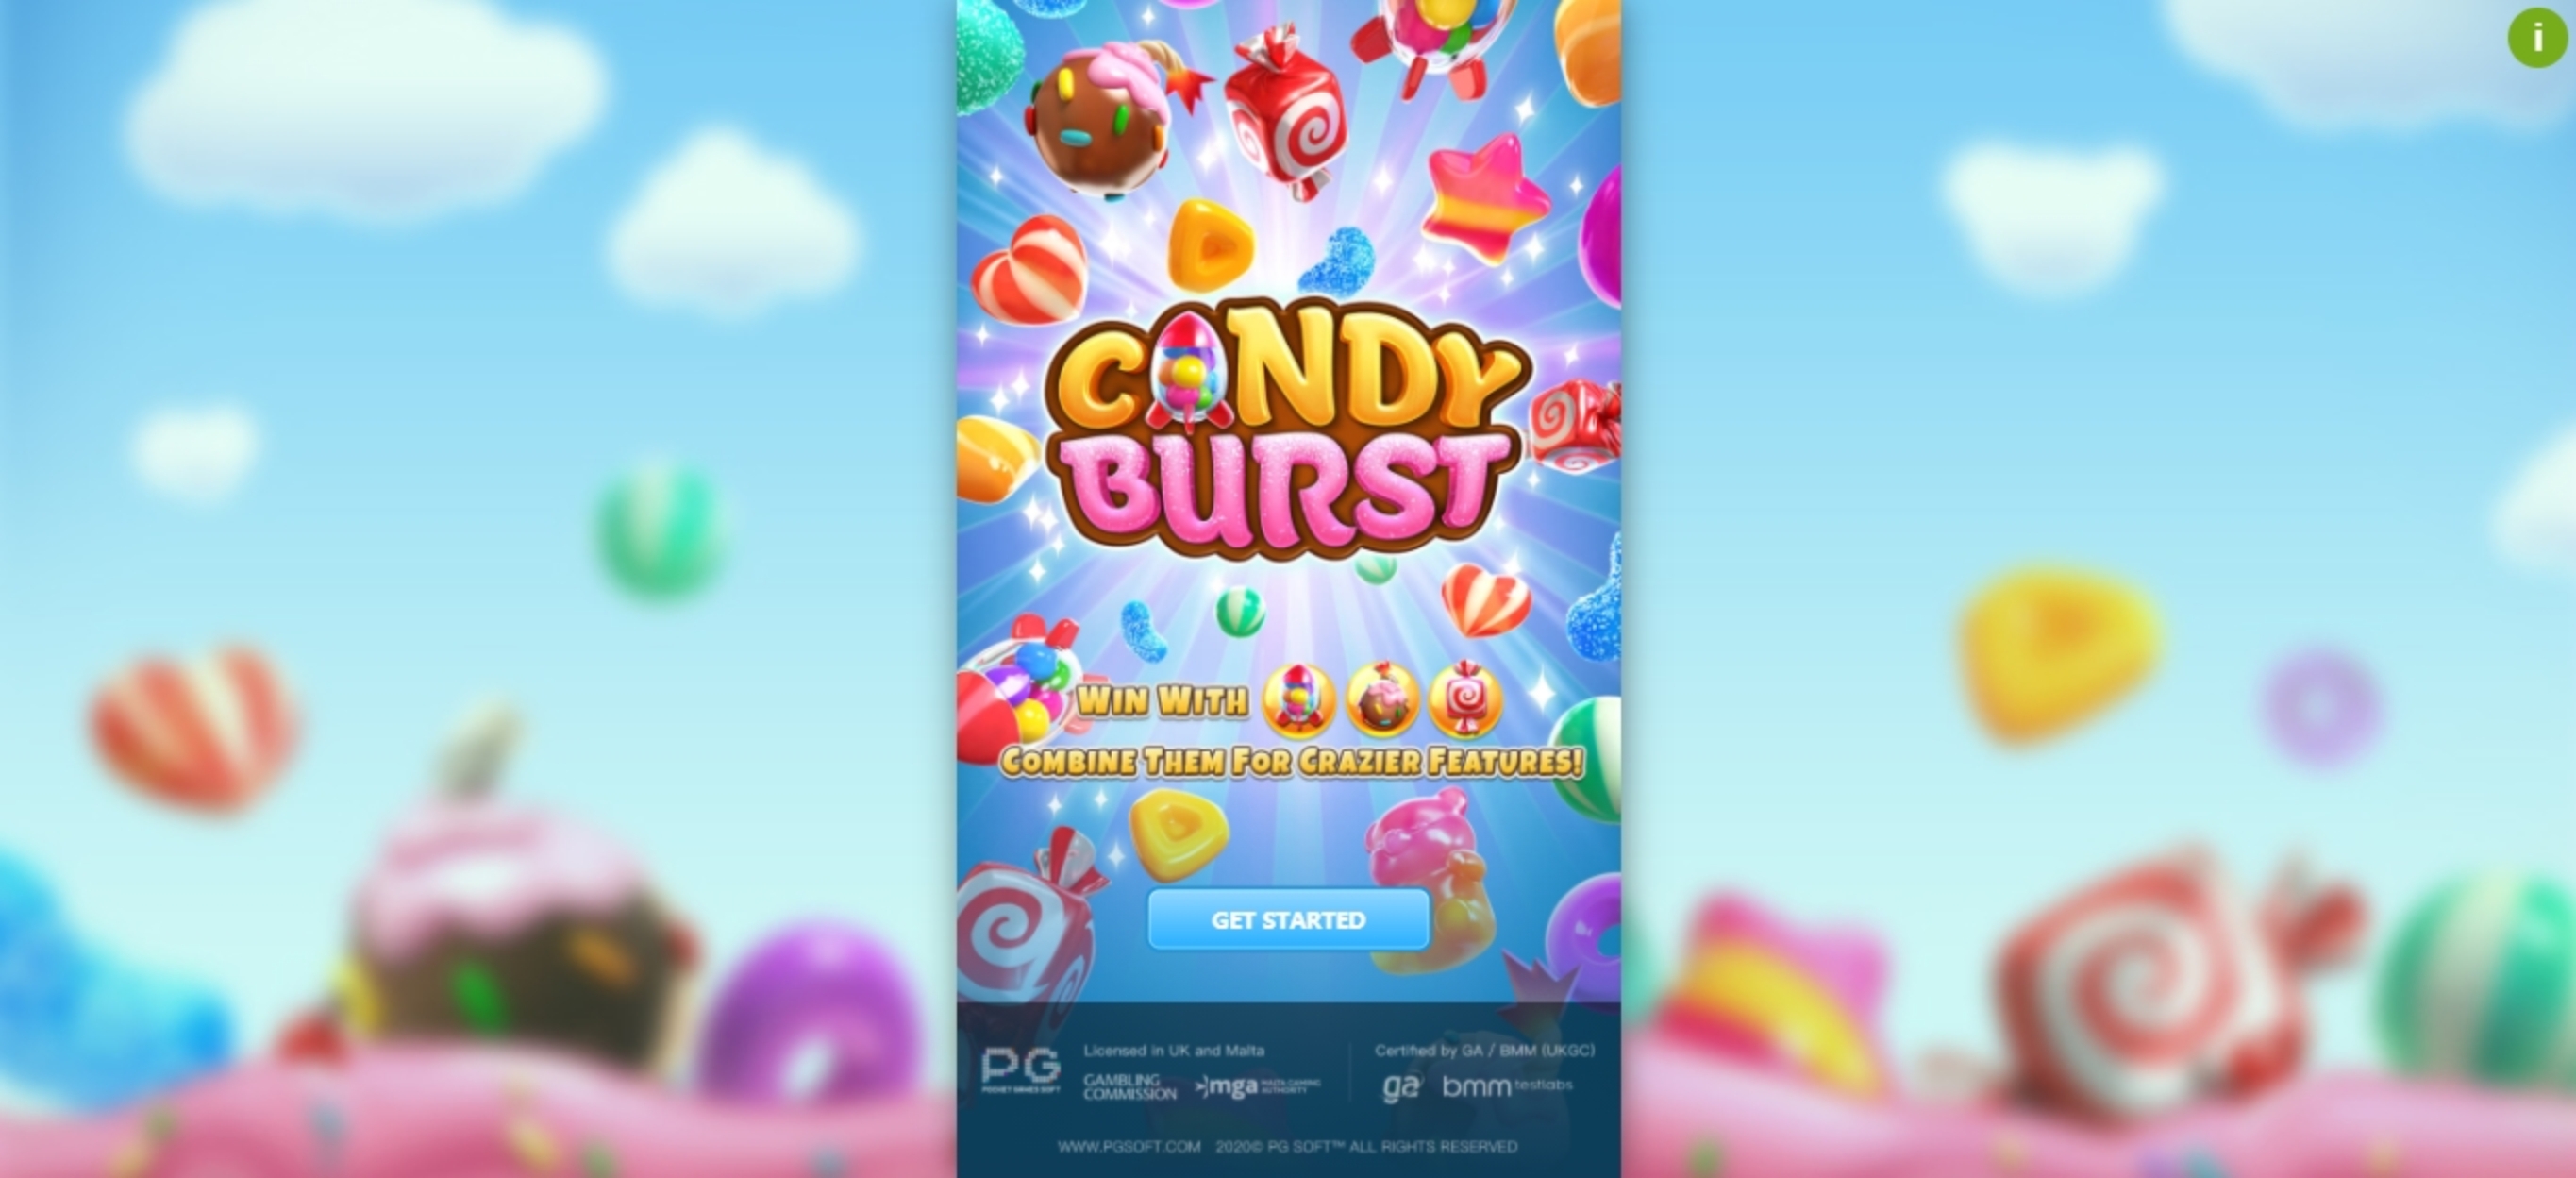 Play Candy Burst Free Casino Slot Game by PG Soft